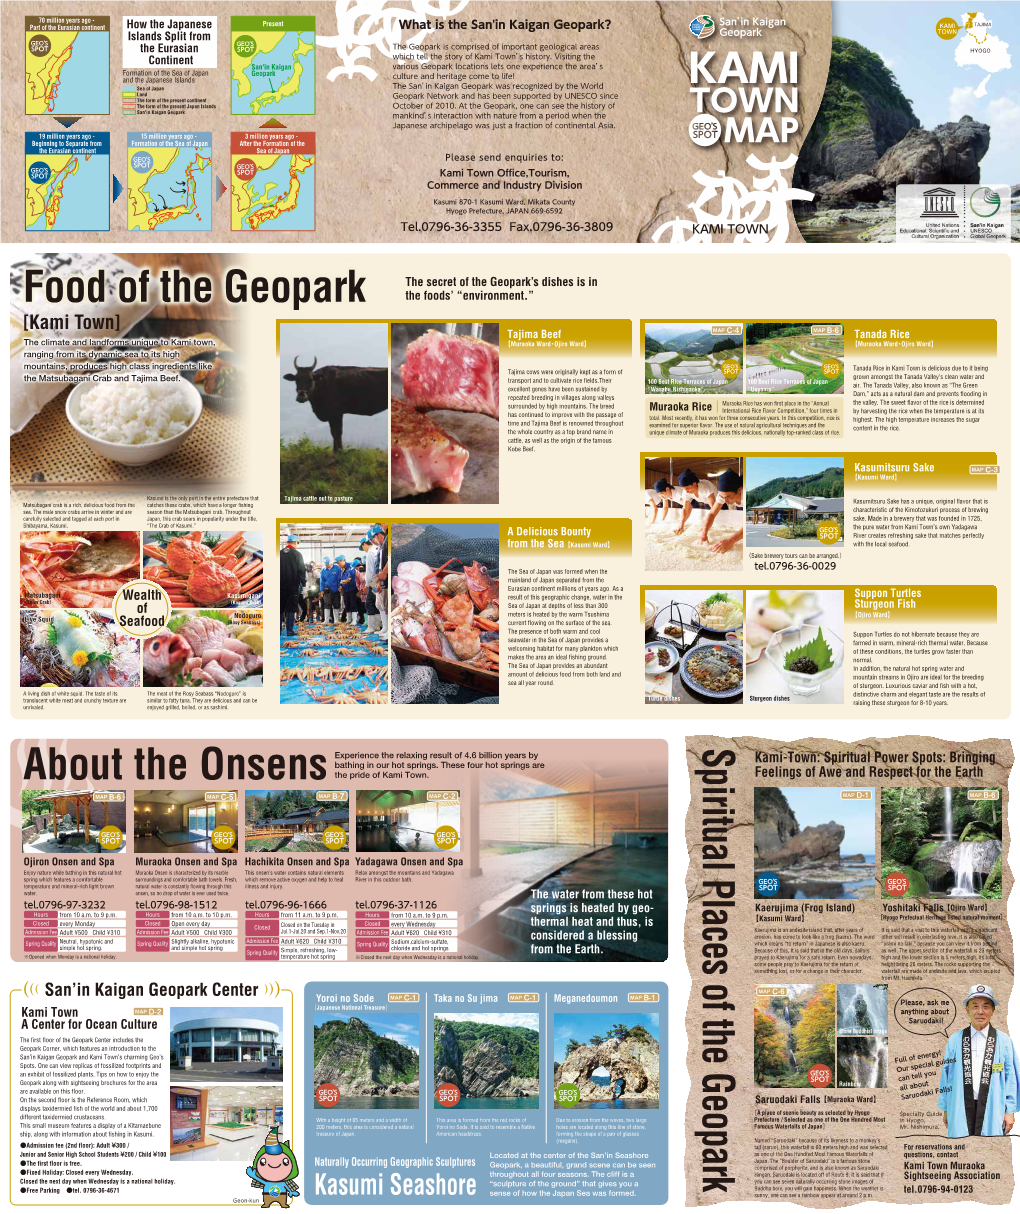 Food of the Geopark About the Onsens Spiritual Places of The